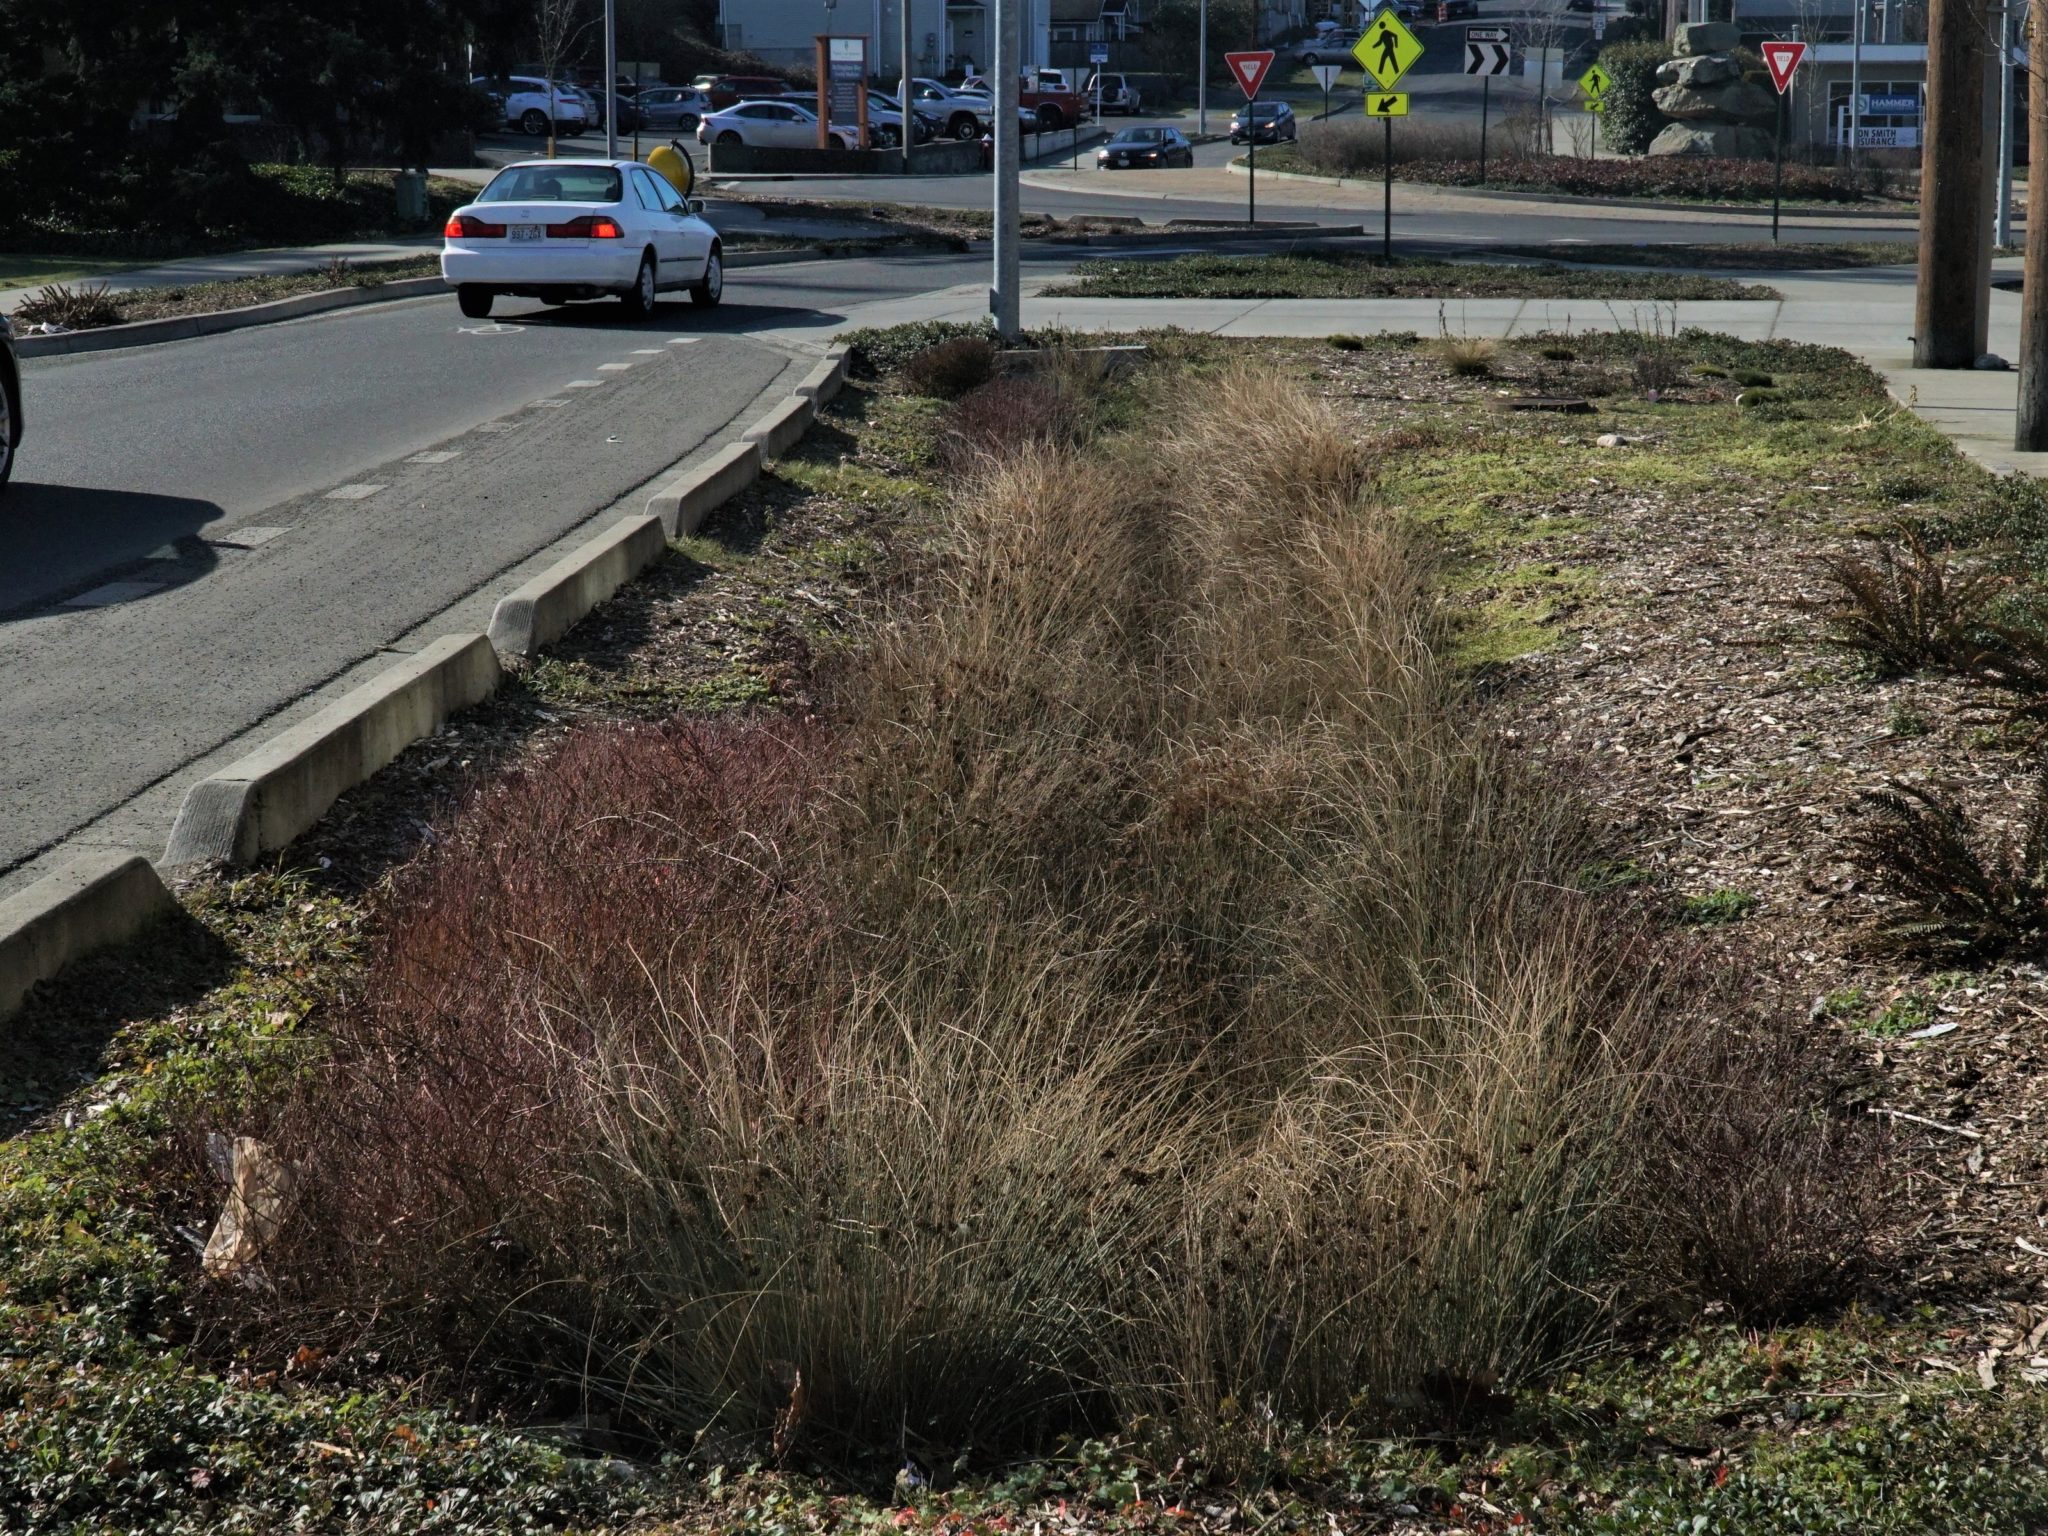 This bioswale was incorporated into the design for the nearby roundabout. It helps to beautify the intersection, improve safety, and treat stormwater runoff.